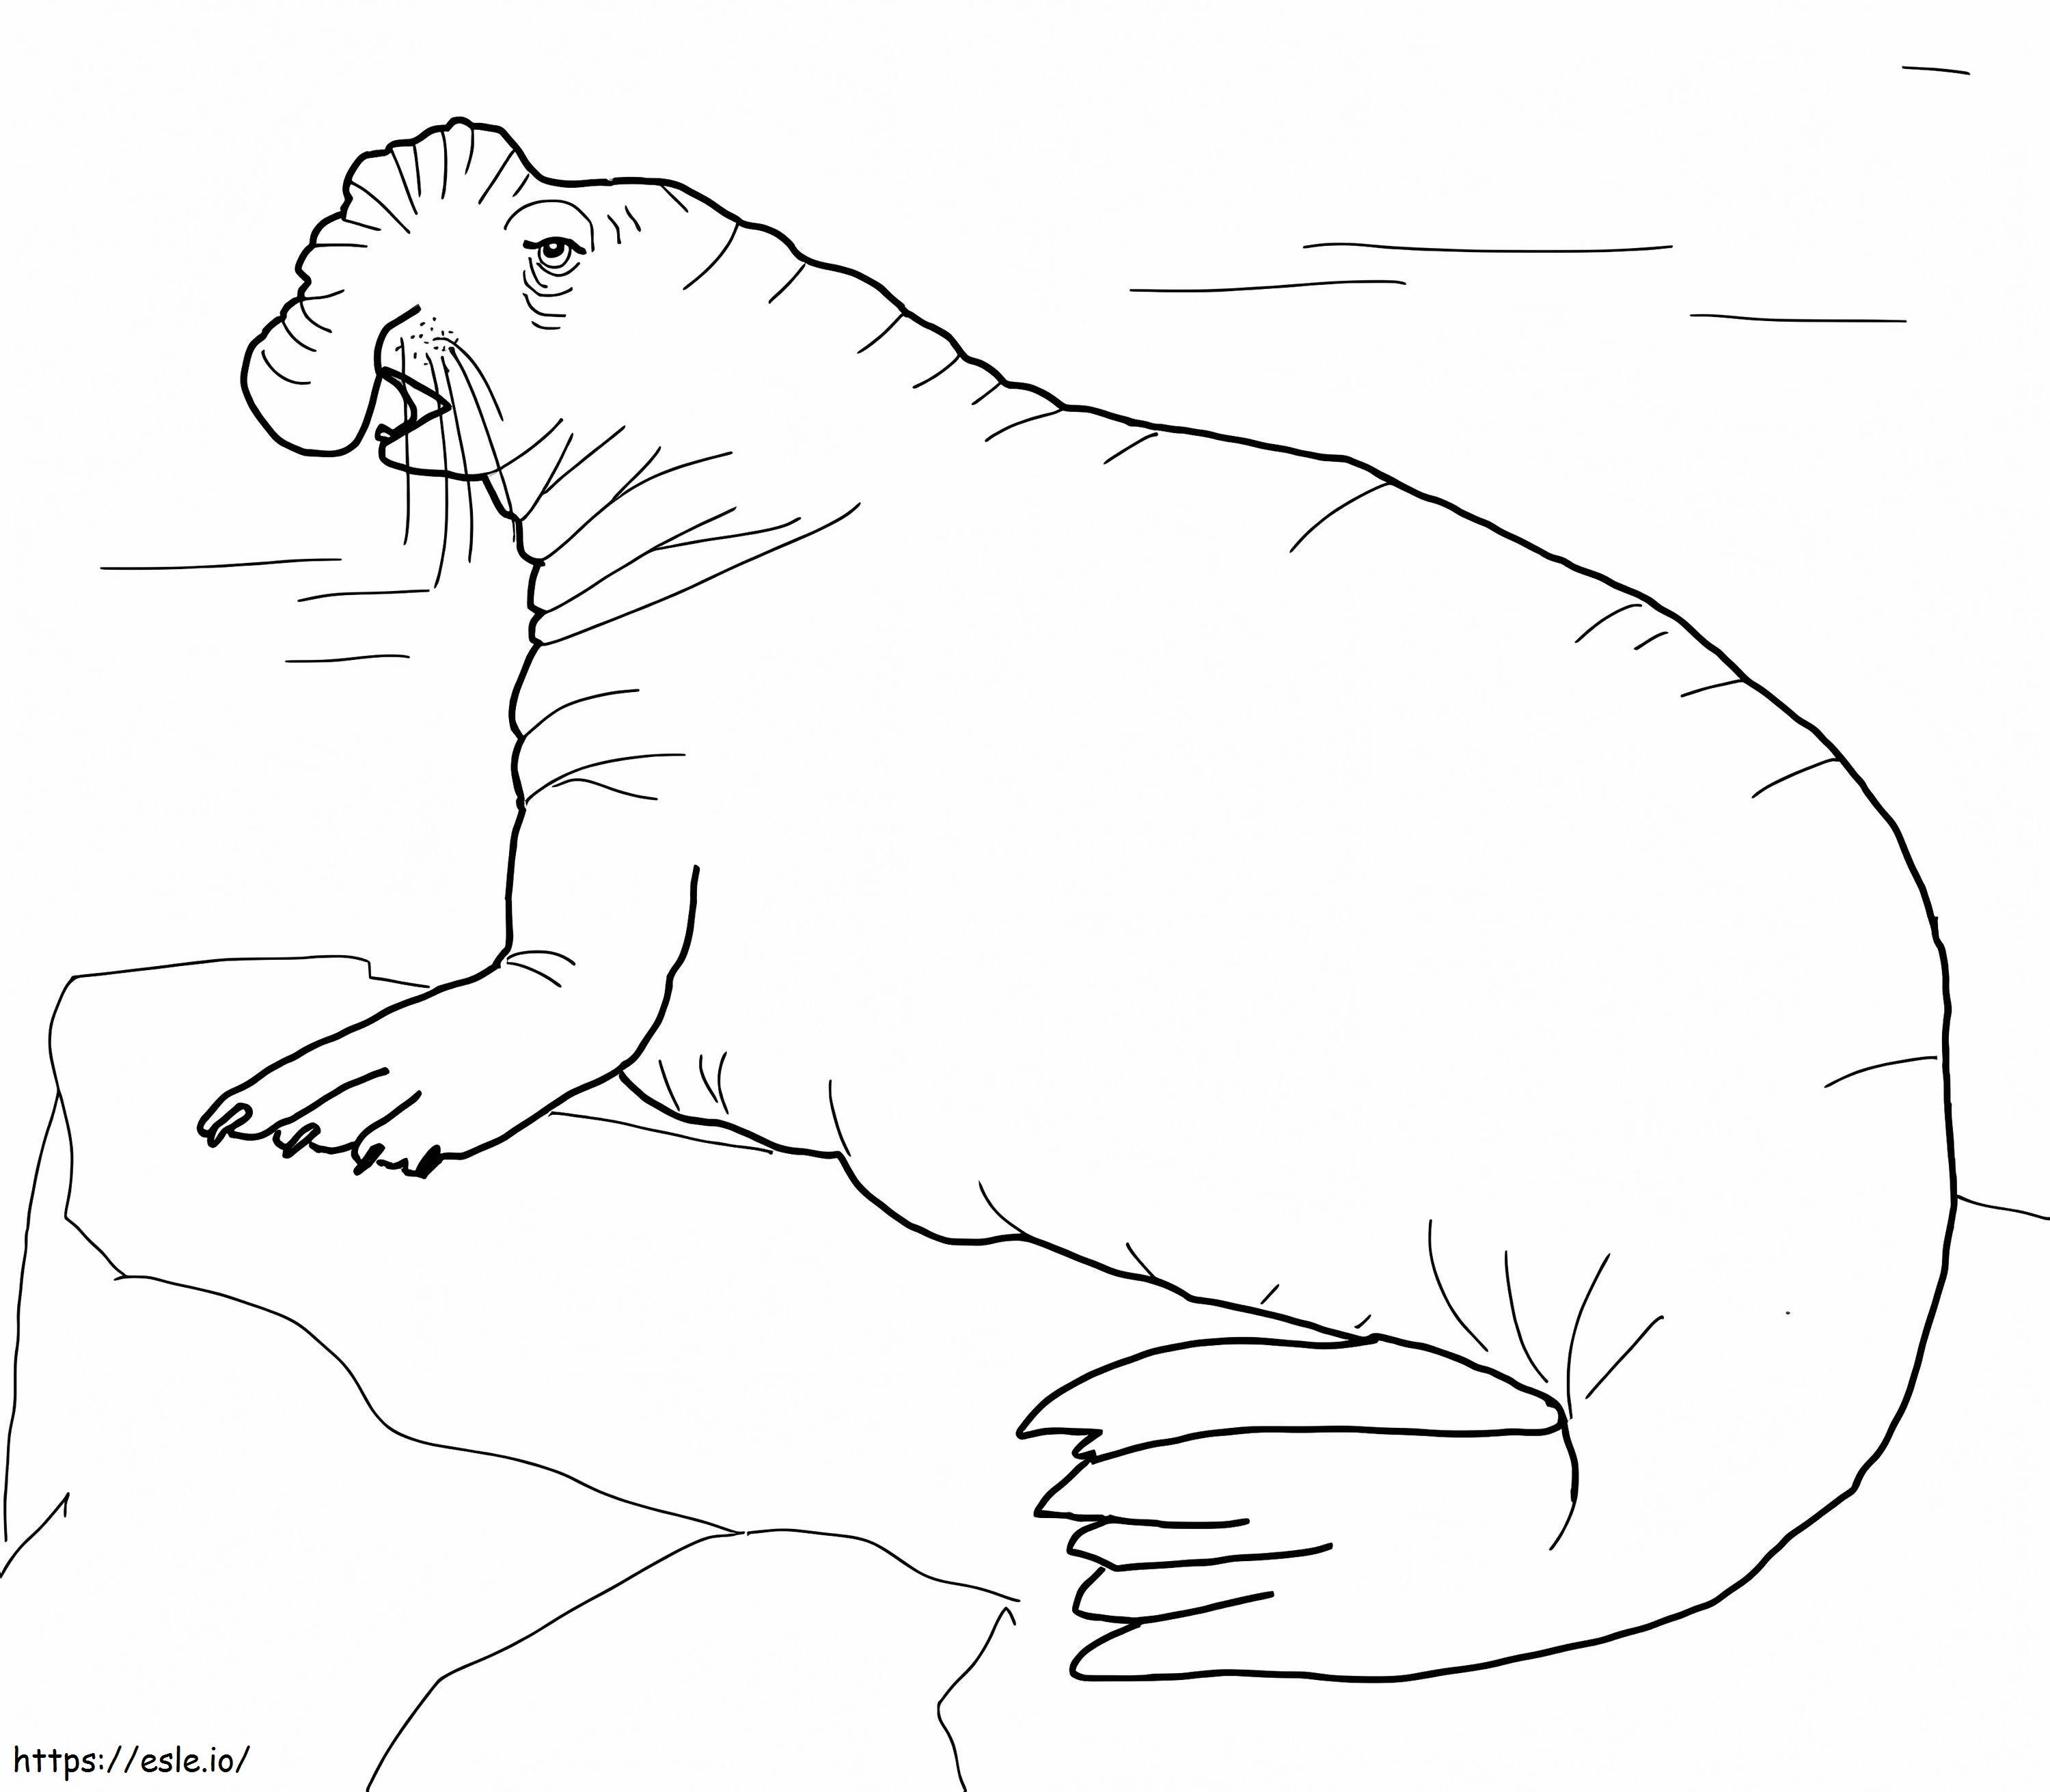 Southern Elephant Seal coloring page